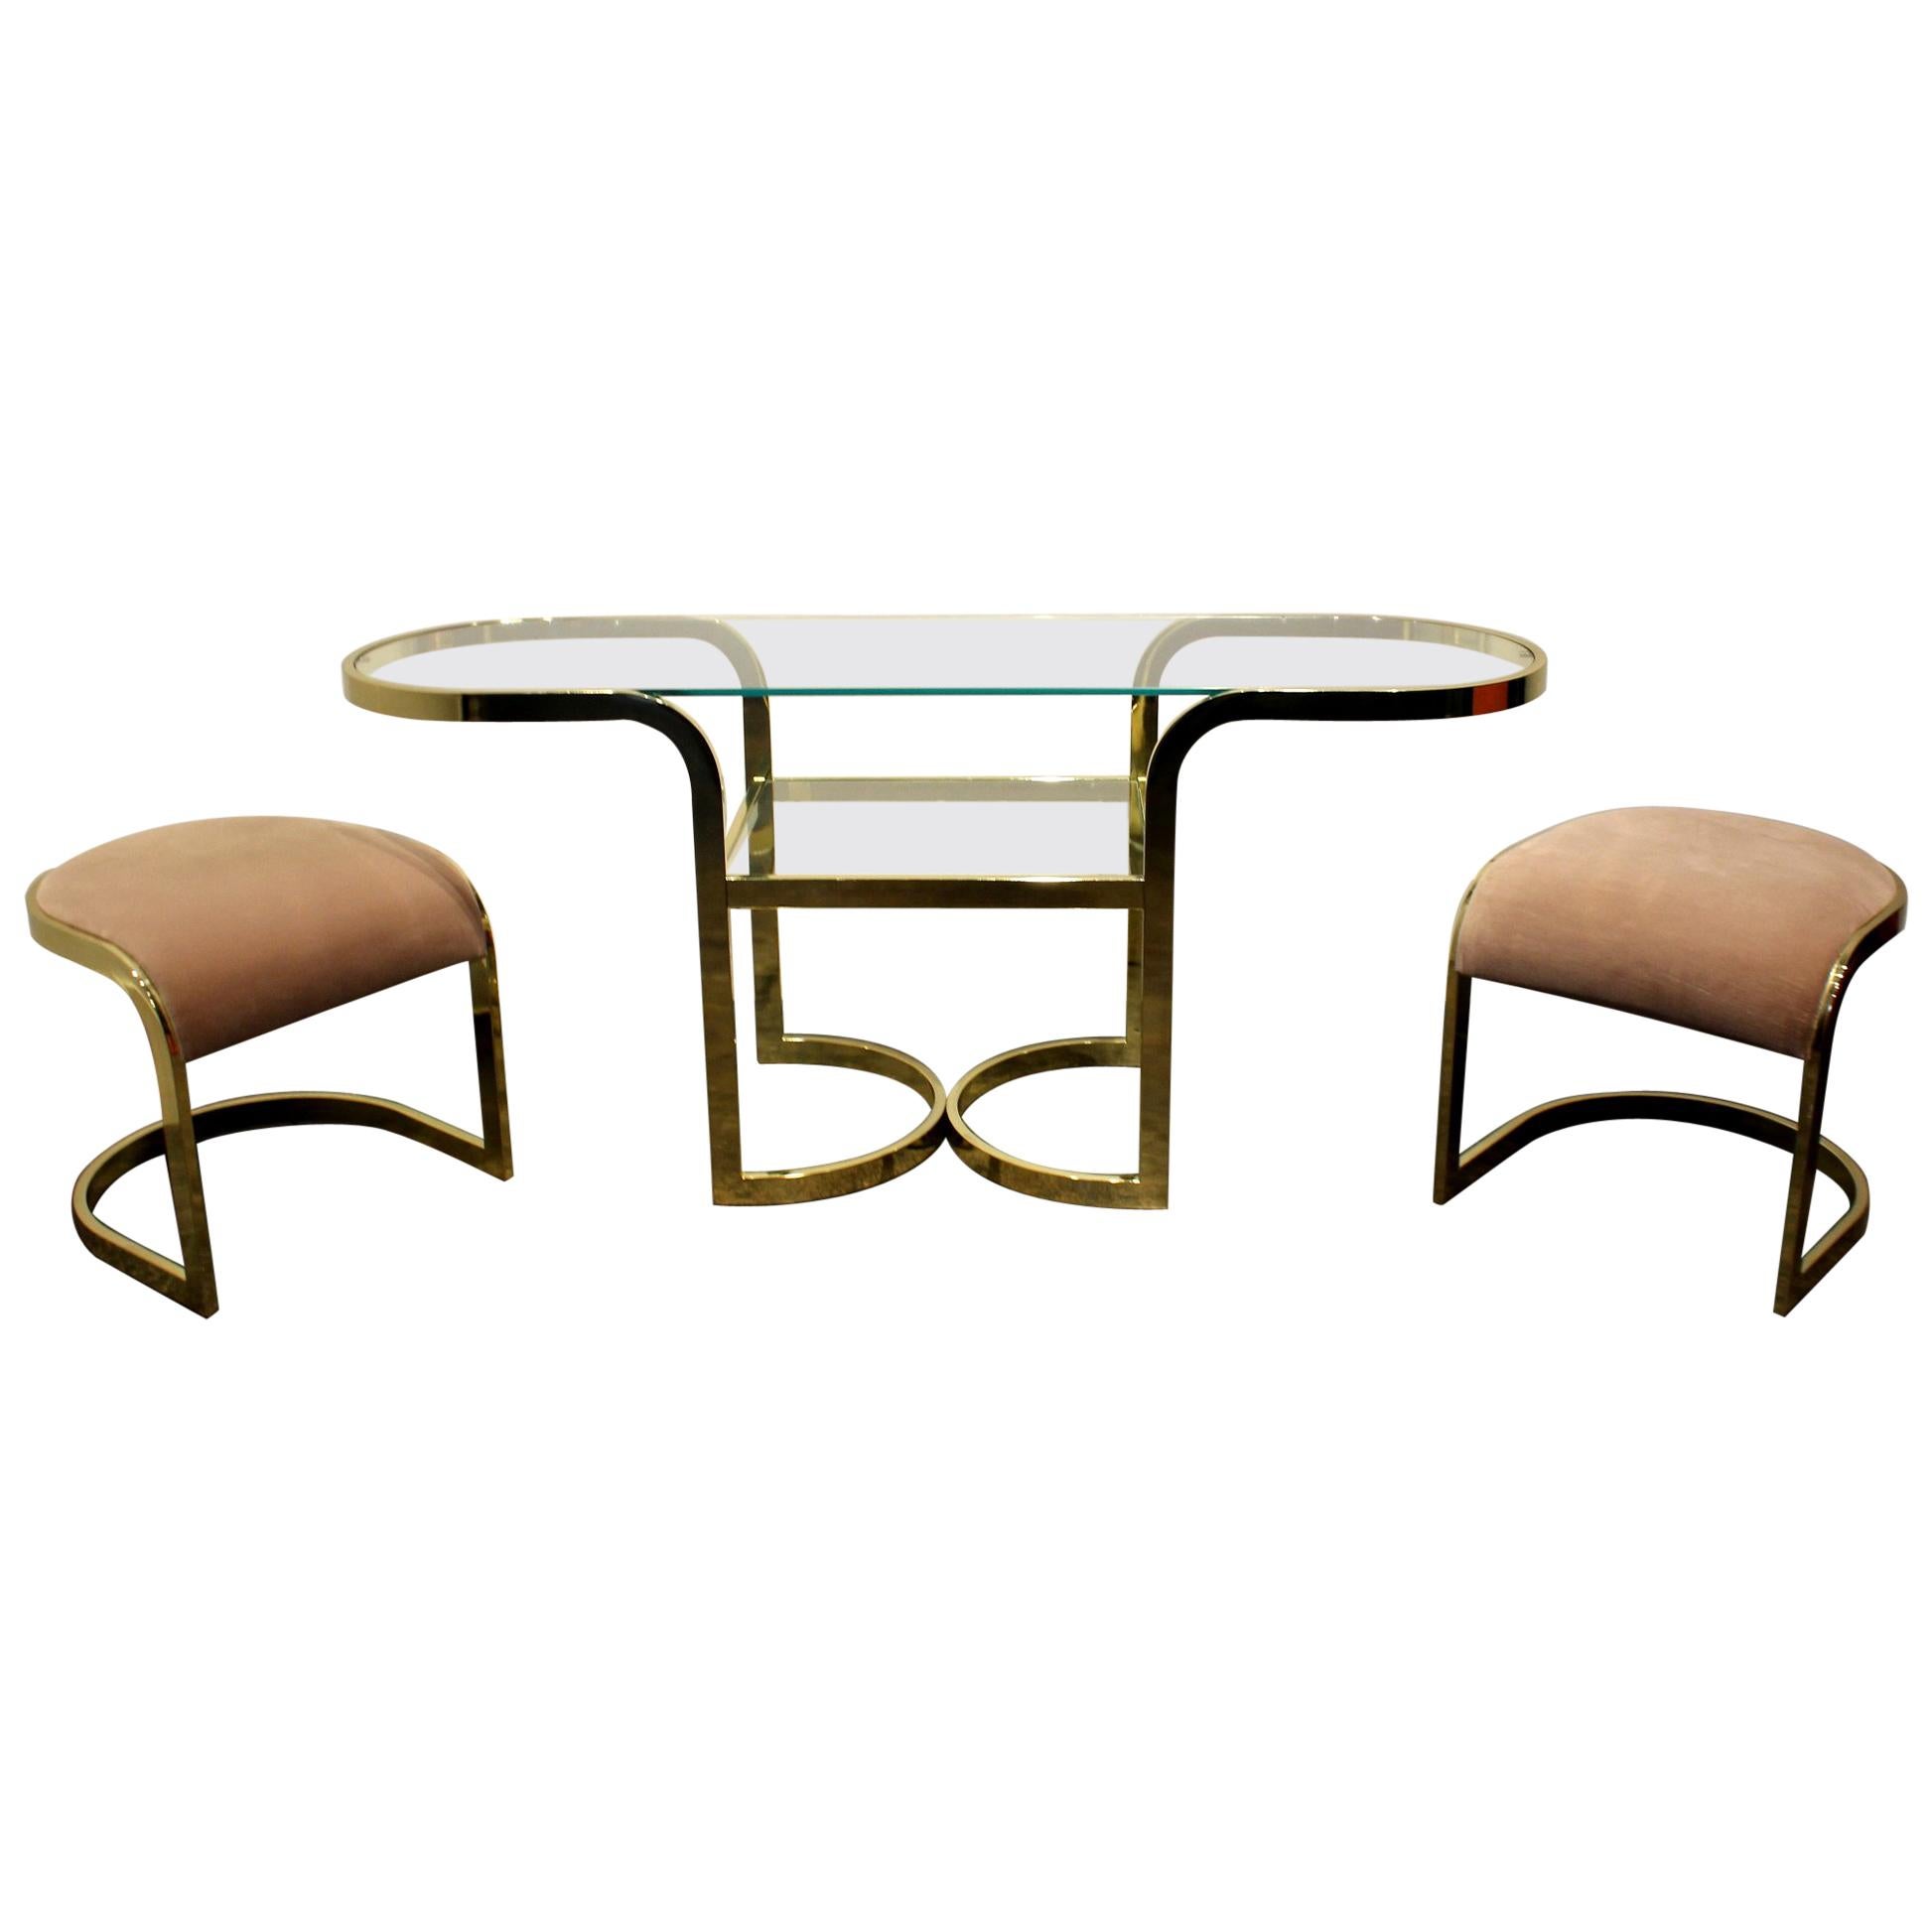 Brass Console Cafe Table with Pink Chairs by DIA Design Institute of America im Angebot